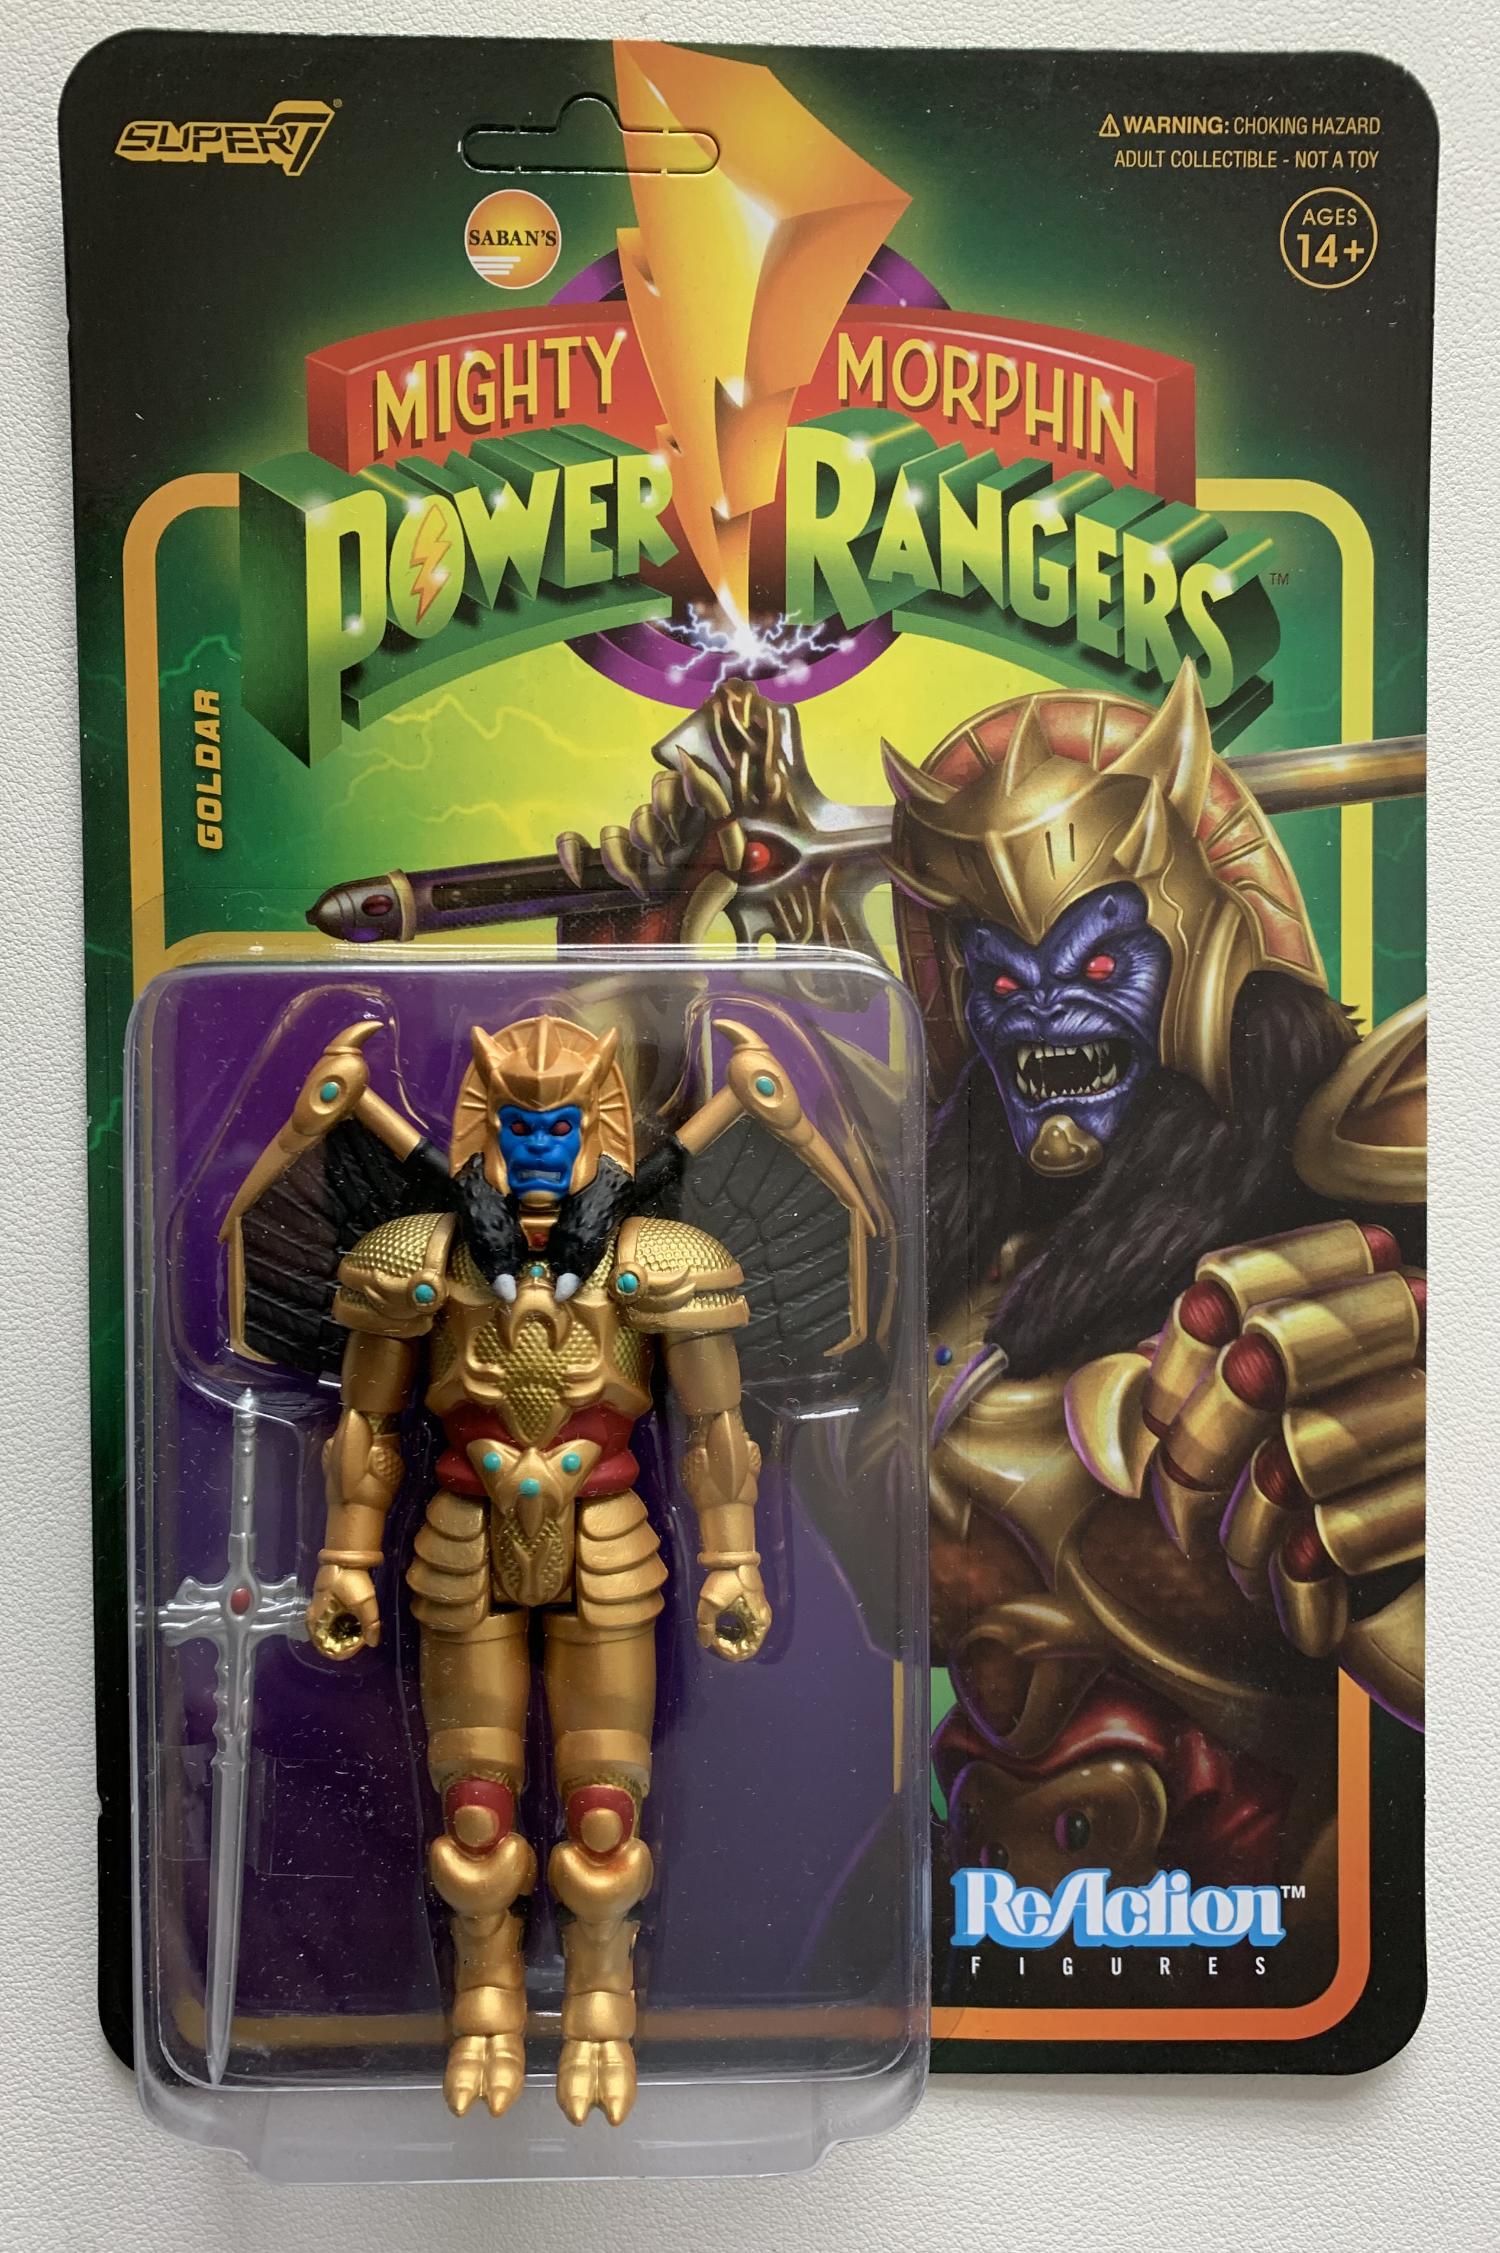 Goldar, ReAction figure from the TV series ‘Power Rangers’  Wave2, Super7